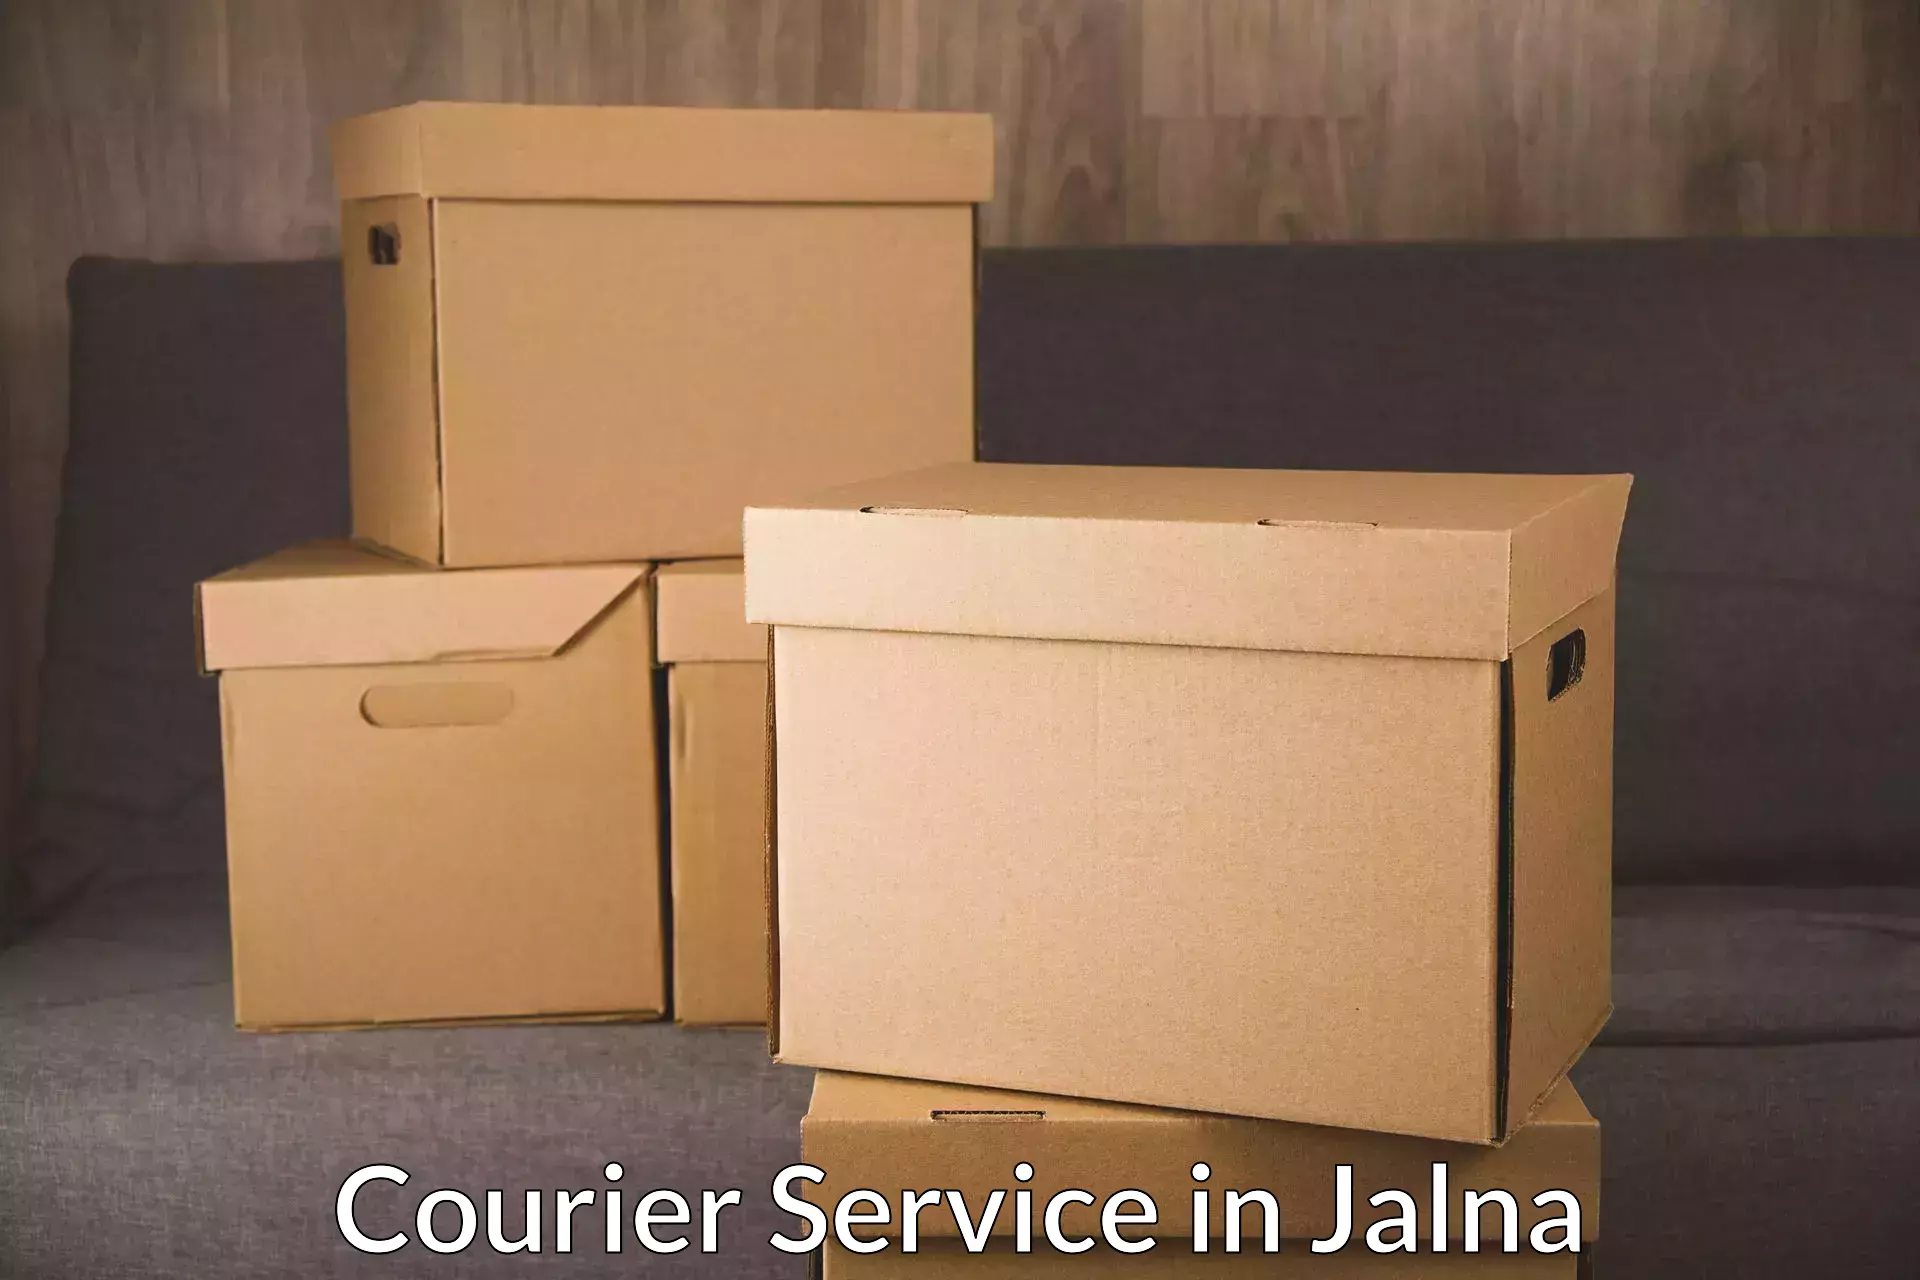 Cash on delivery service in Jalna